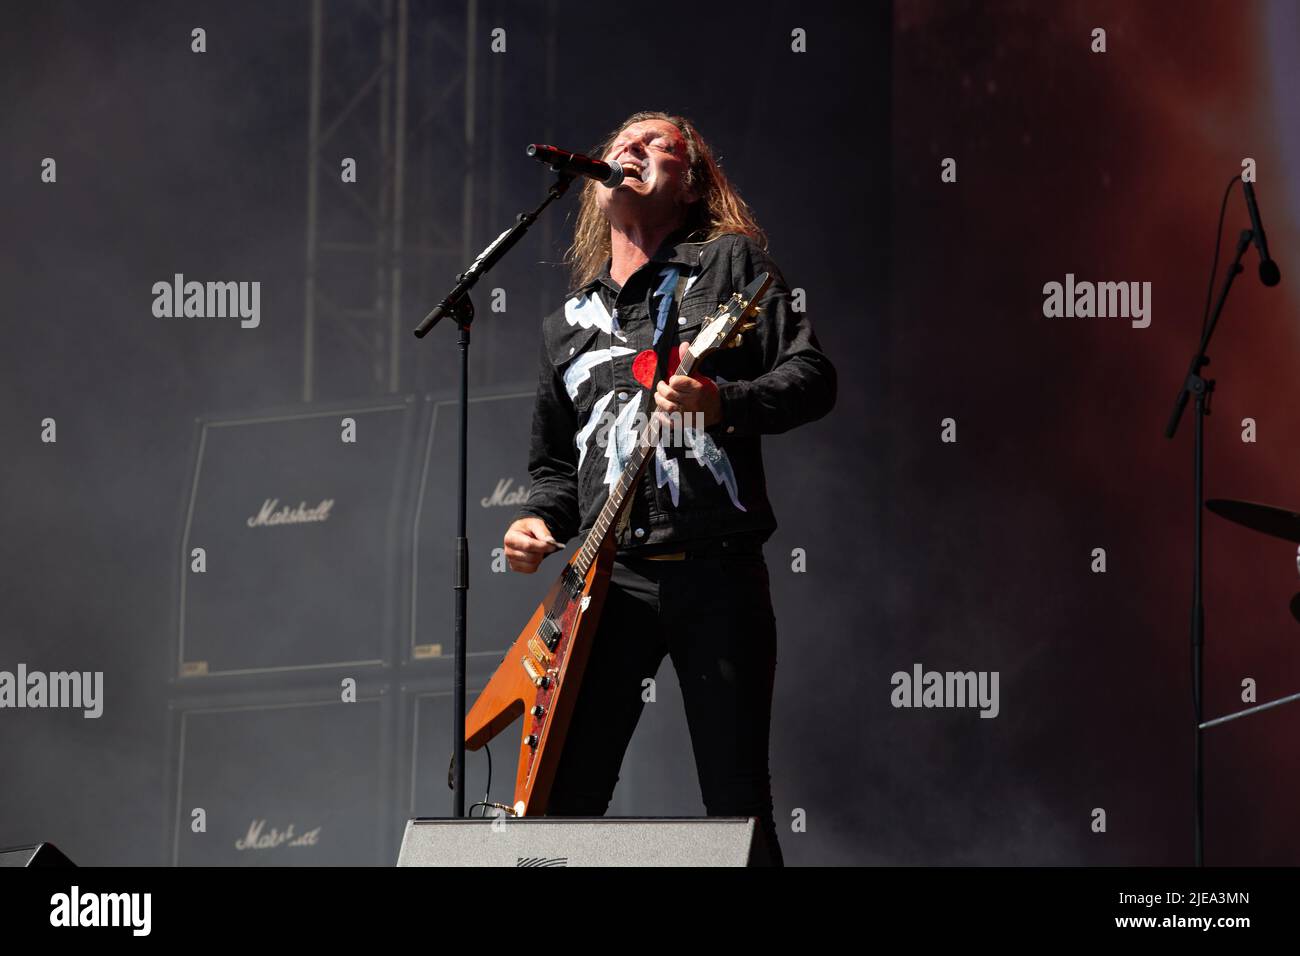 Oslo, Norway. 24th, June 2022. The Danish rock band D-A-D performs a live concert during the Norwegian music festival Tons of Rock 2022 in Oslo. Here vocalist and guitarist Jesper Binzer is seen live on stage. (Photo credit: Gonzales Photo - Per-Otto Oppi). Stock Photo